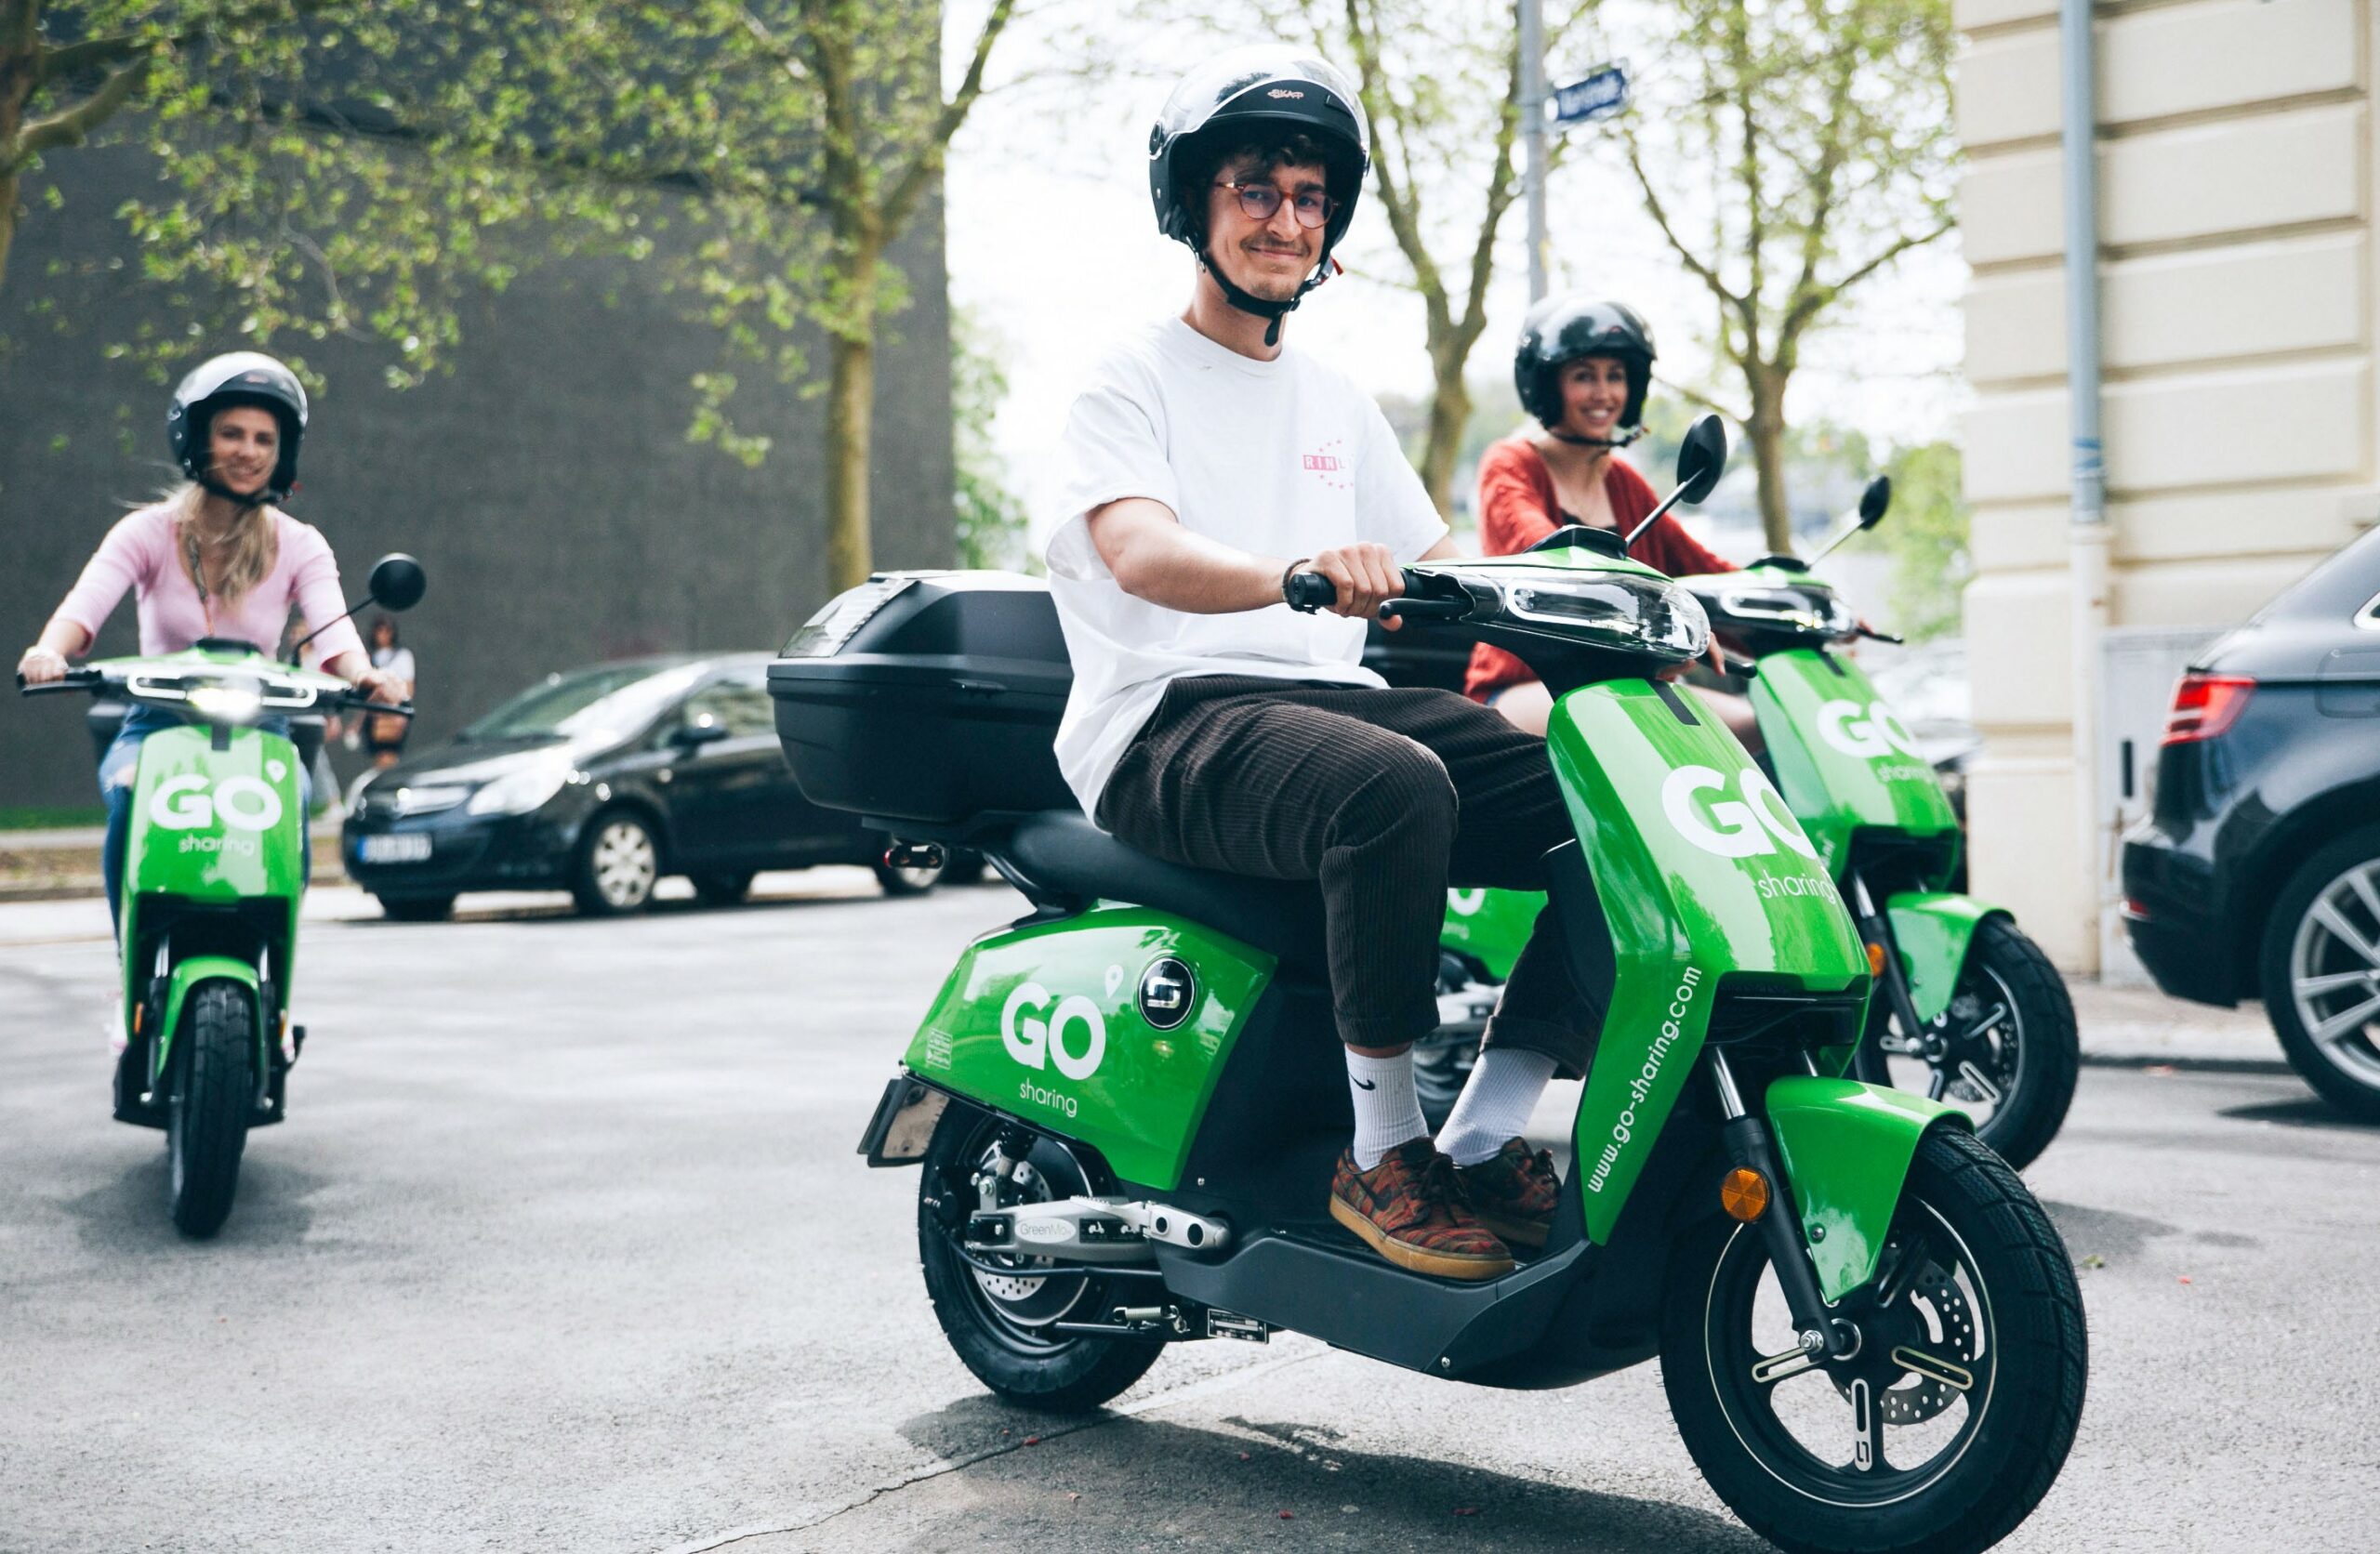 Go Sharing A Green Planet With Mobility For Everyone